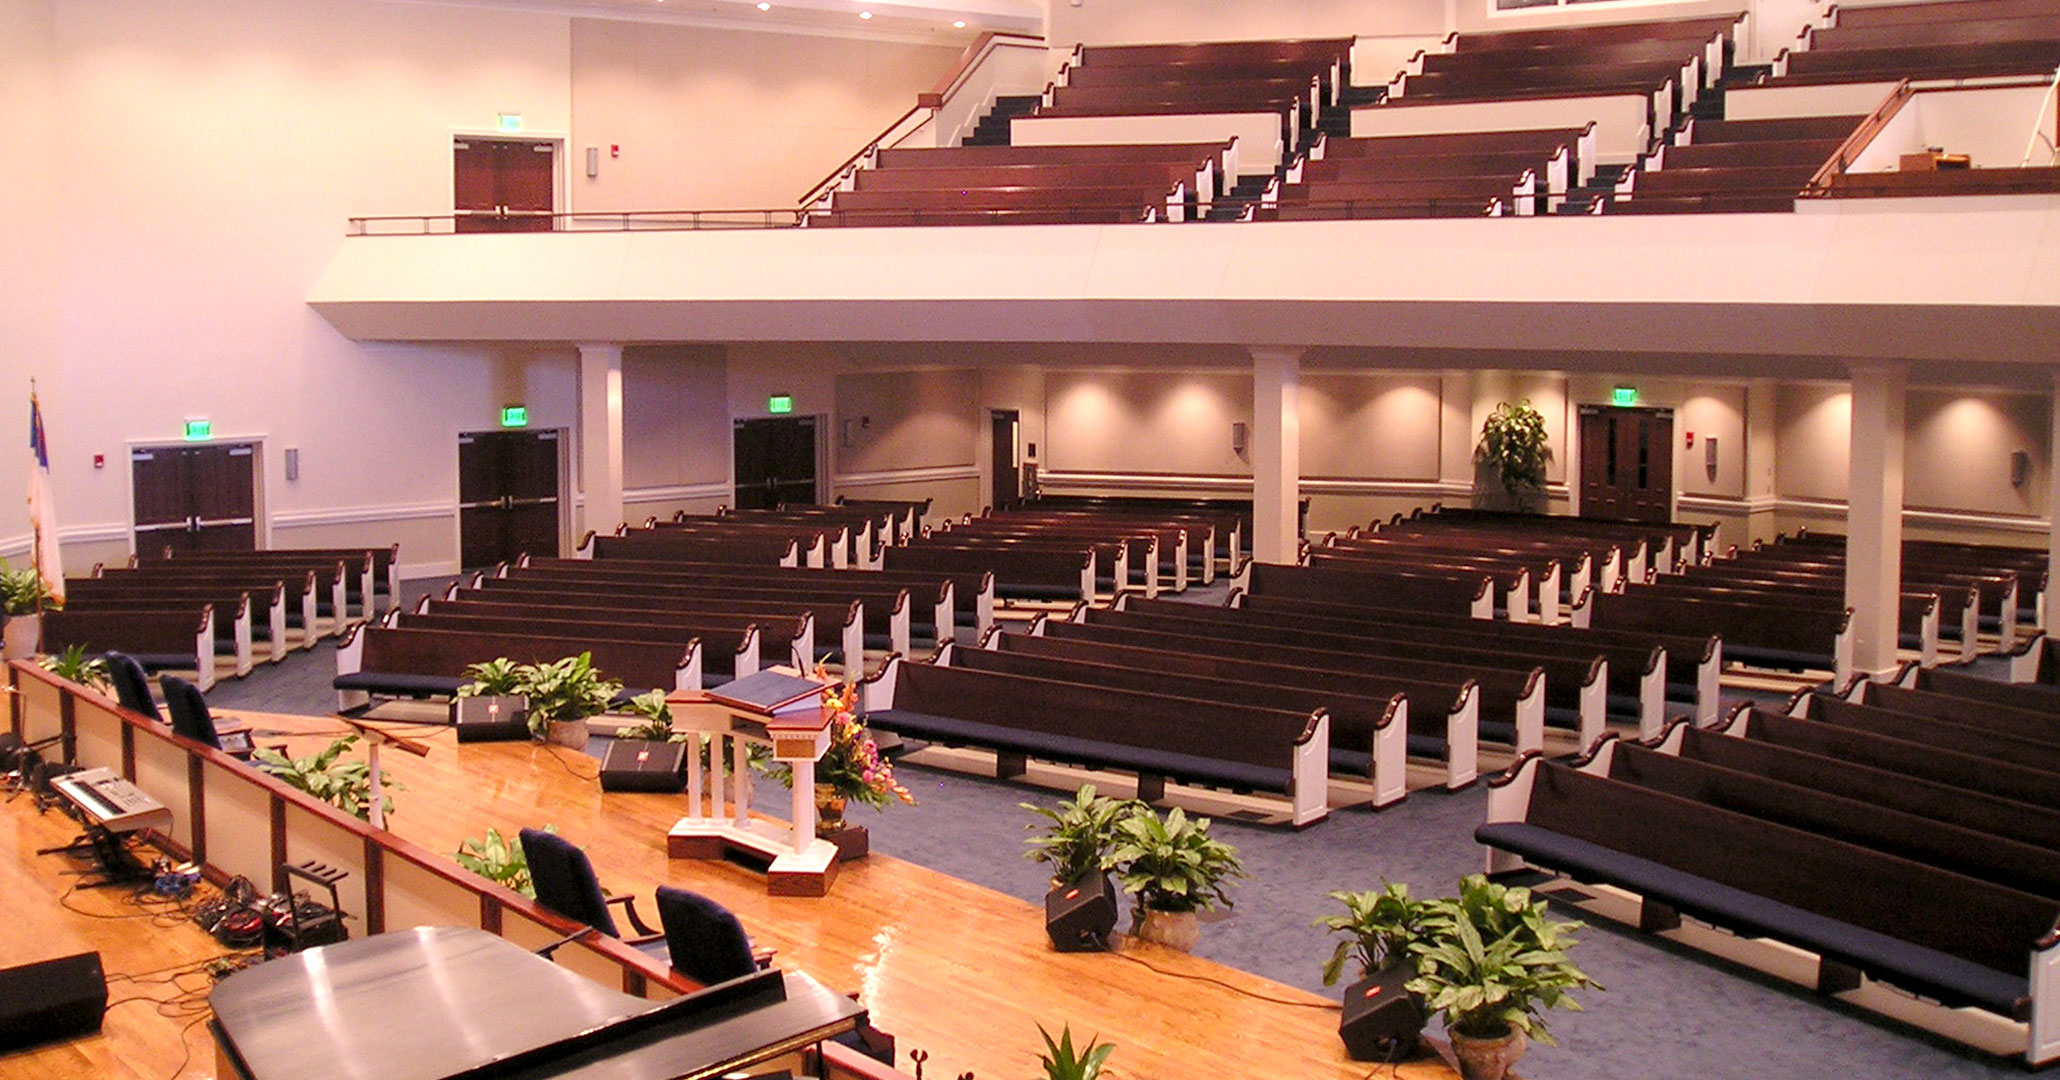 Boudreaux architects worked with the Riverland Hills Church to design a fellowship sanctuary.